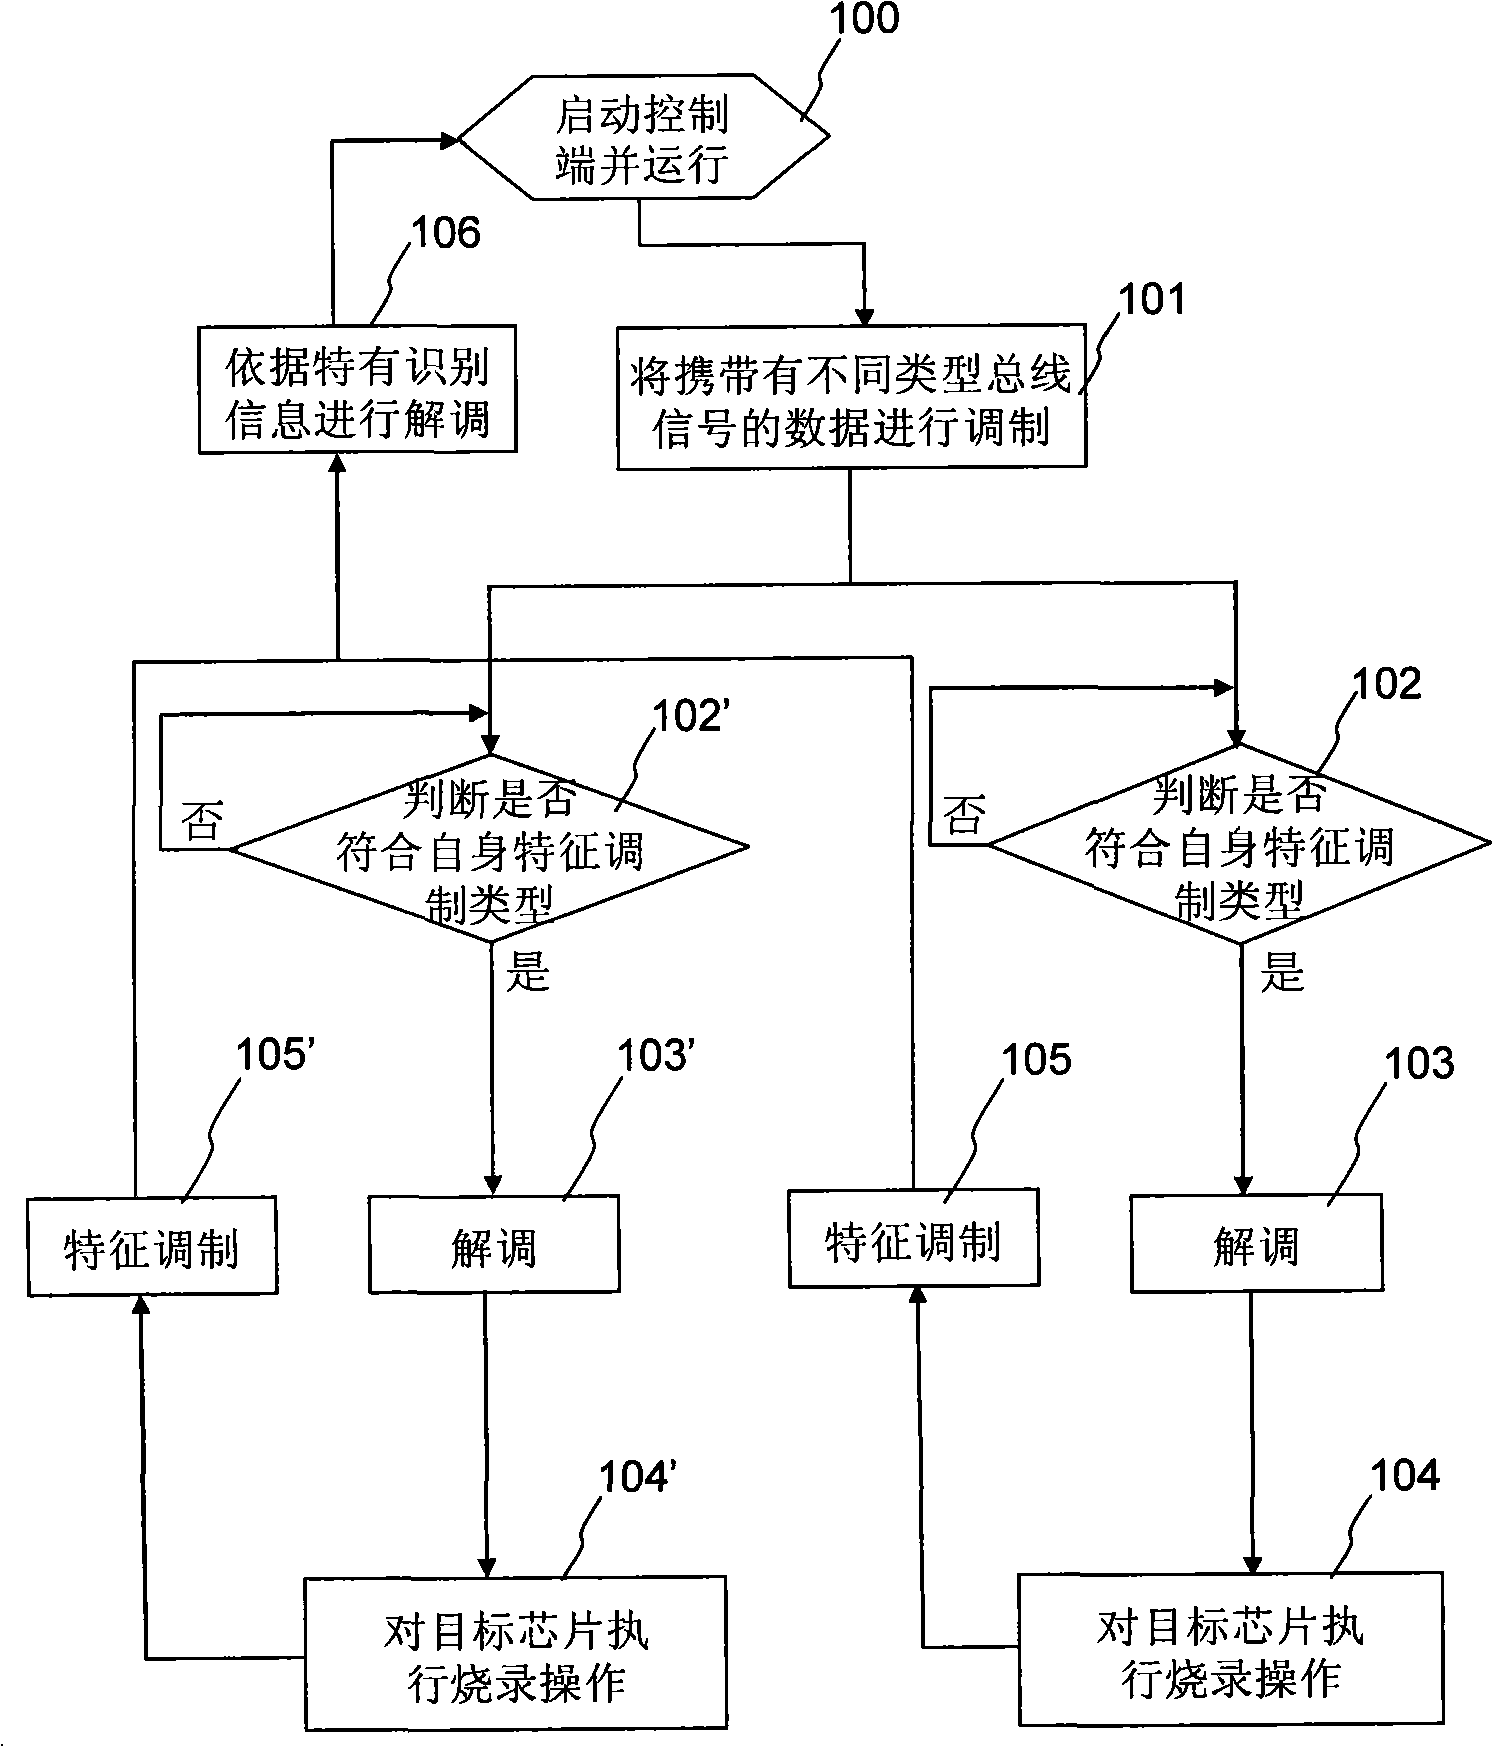 Method adopting multiplexing technique to perform paralleling burning record